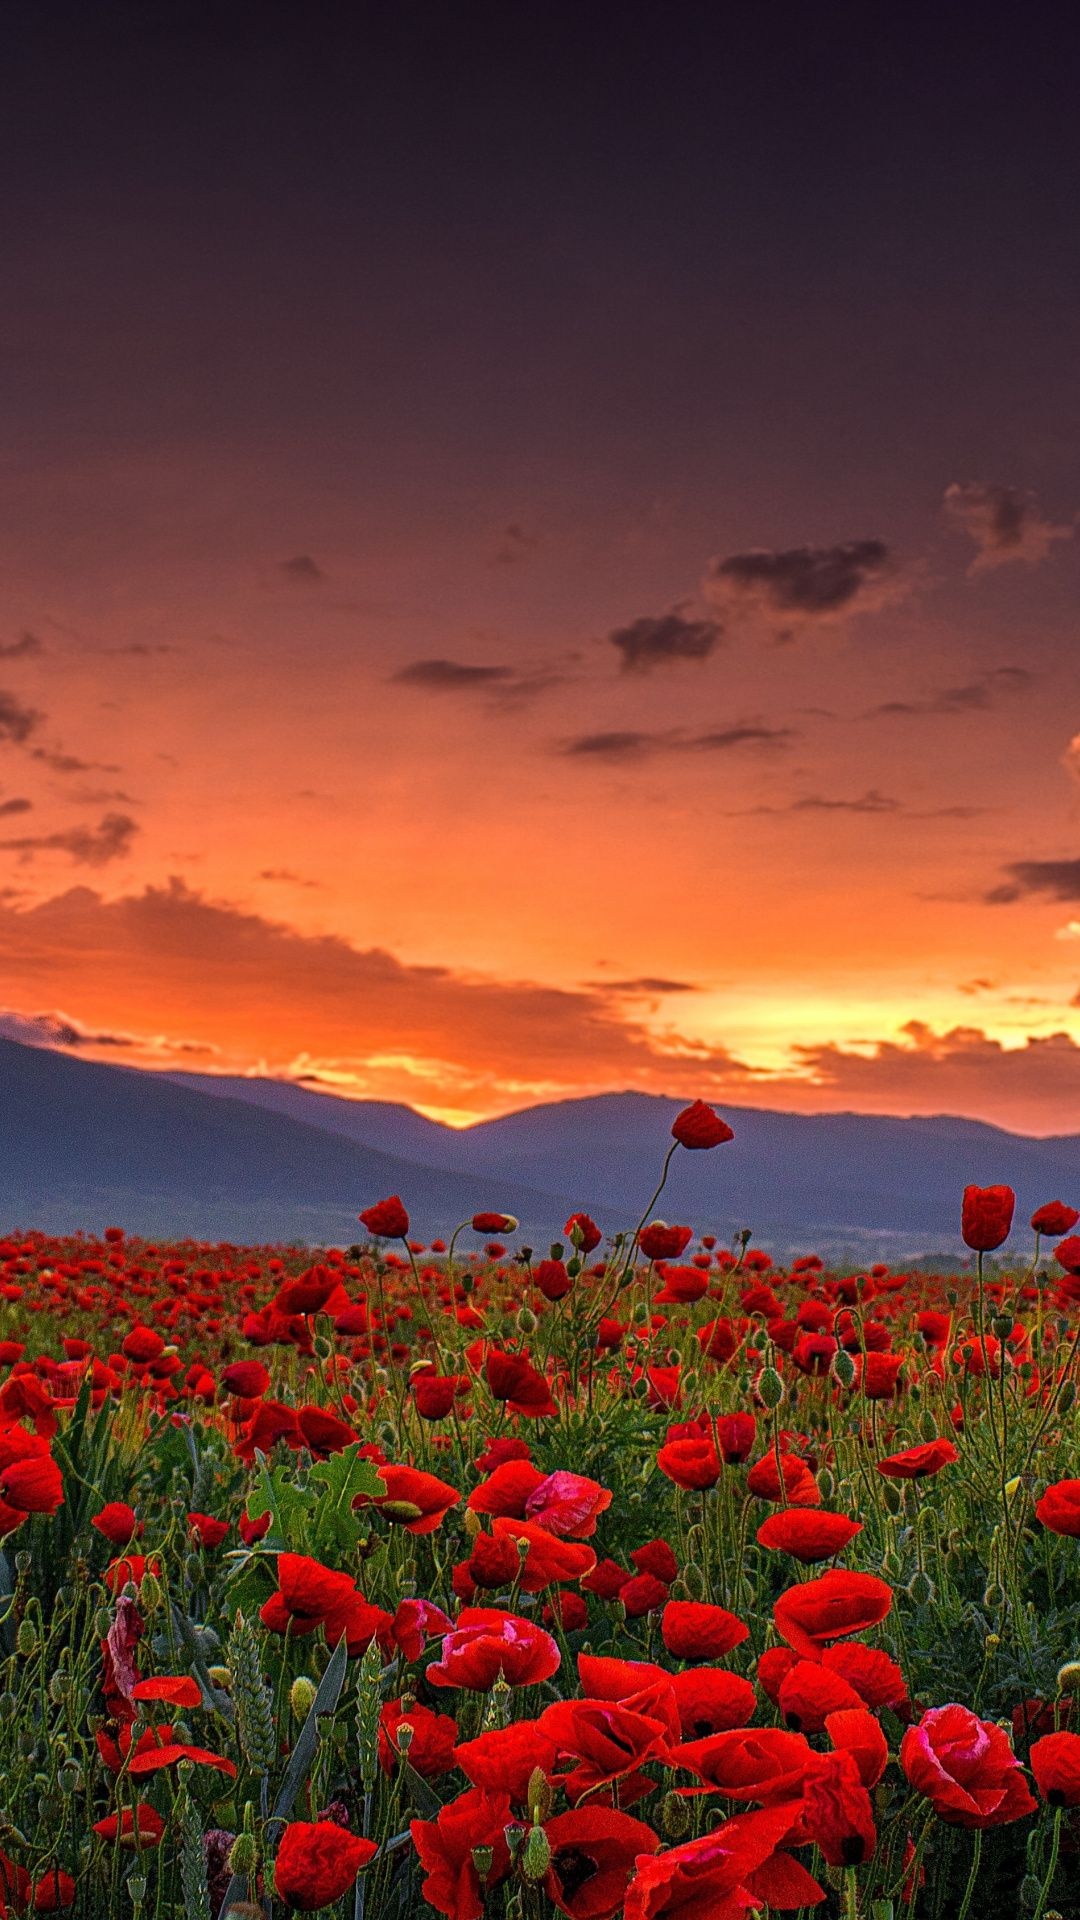 Farm: Poppy field at sunset, Grassland, Herbaceous plants. 1080x1920 Full HD Background.